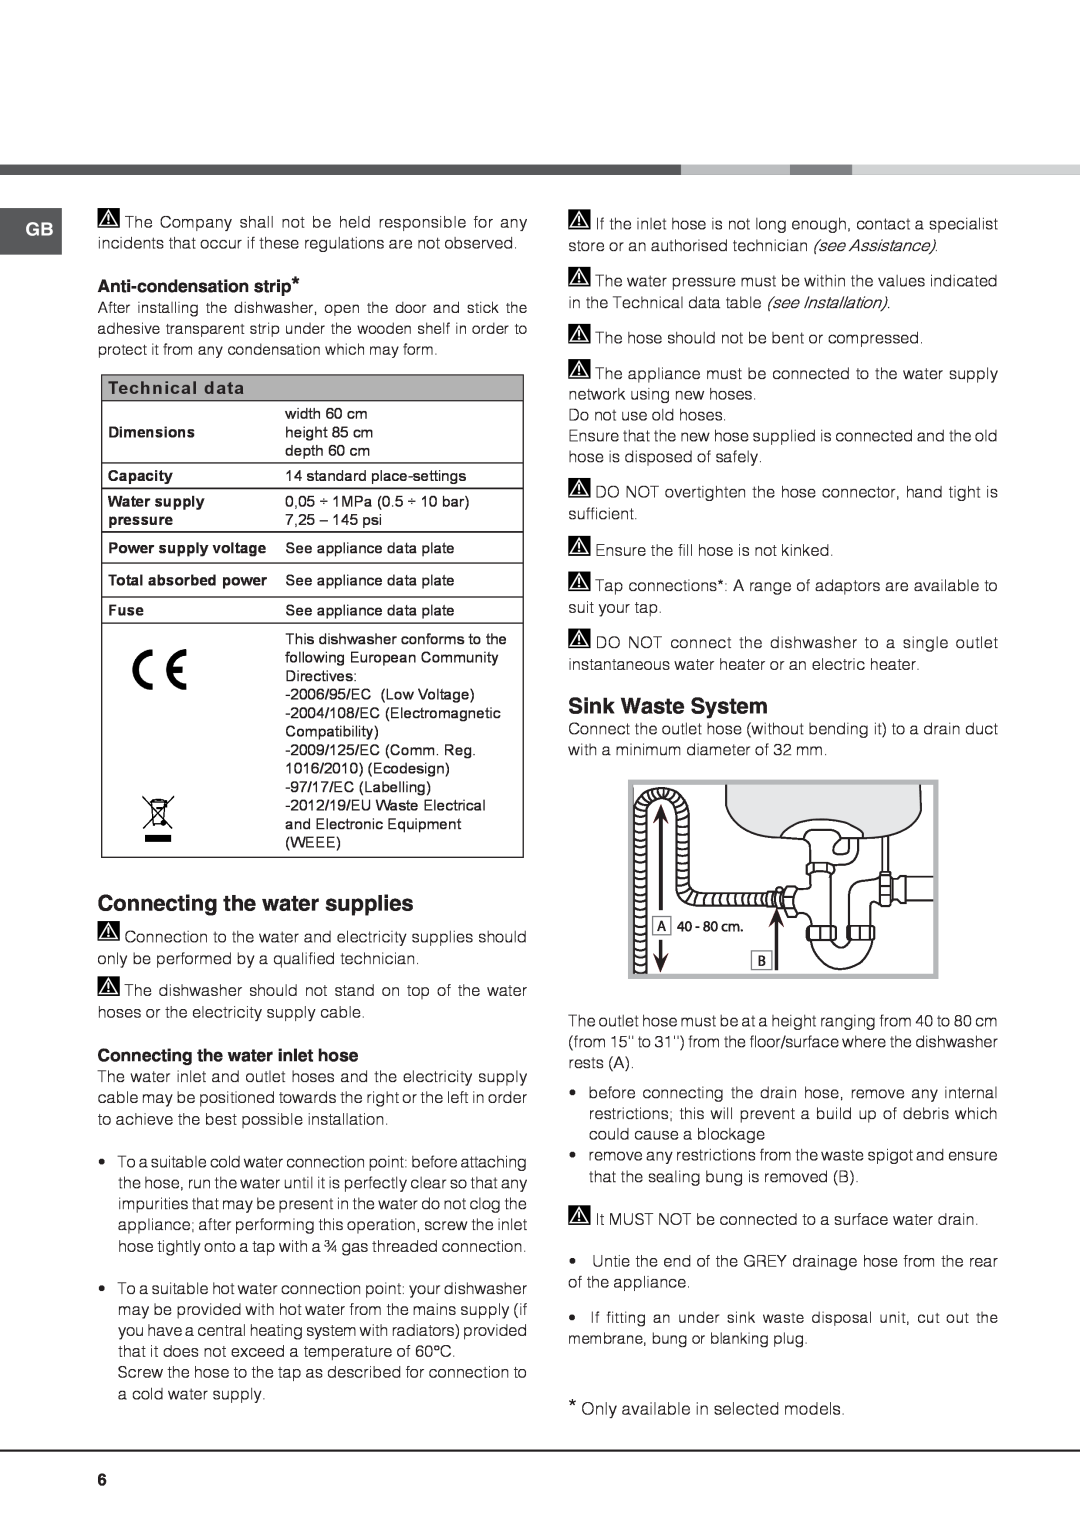 Hotpoint FDFET 33121 manual Connecting the water supplies, Sink Waste System, Anti-condensation strip, Technical data 